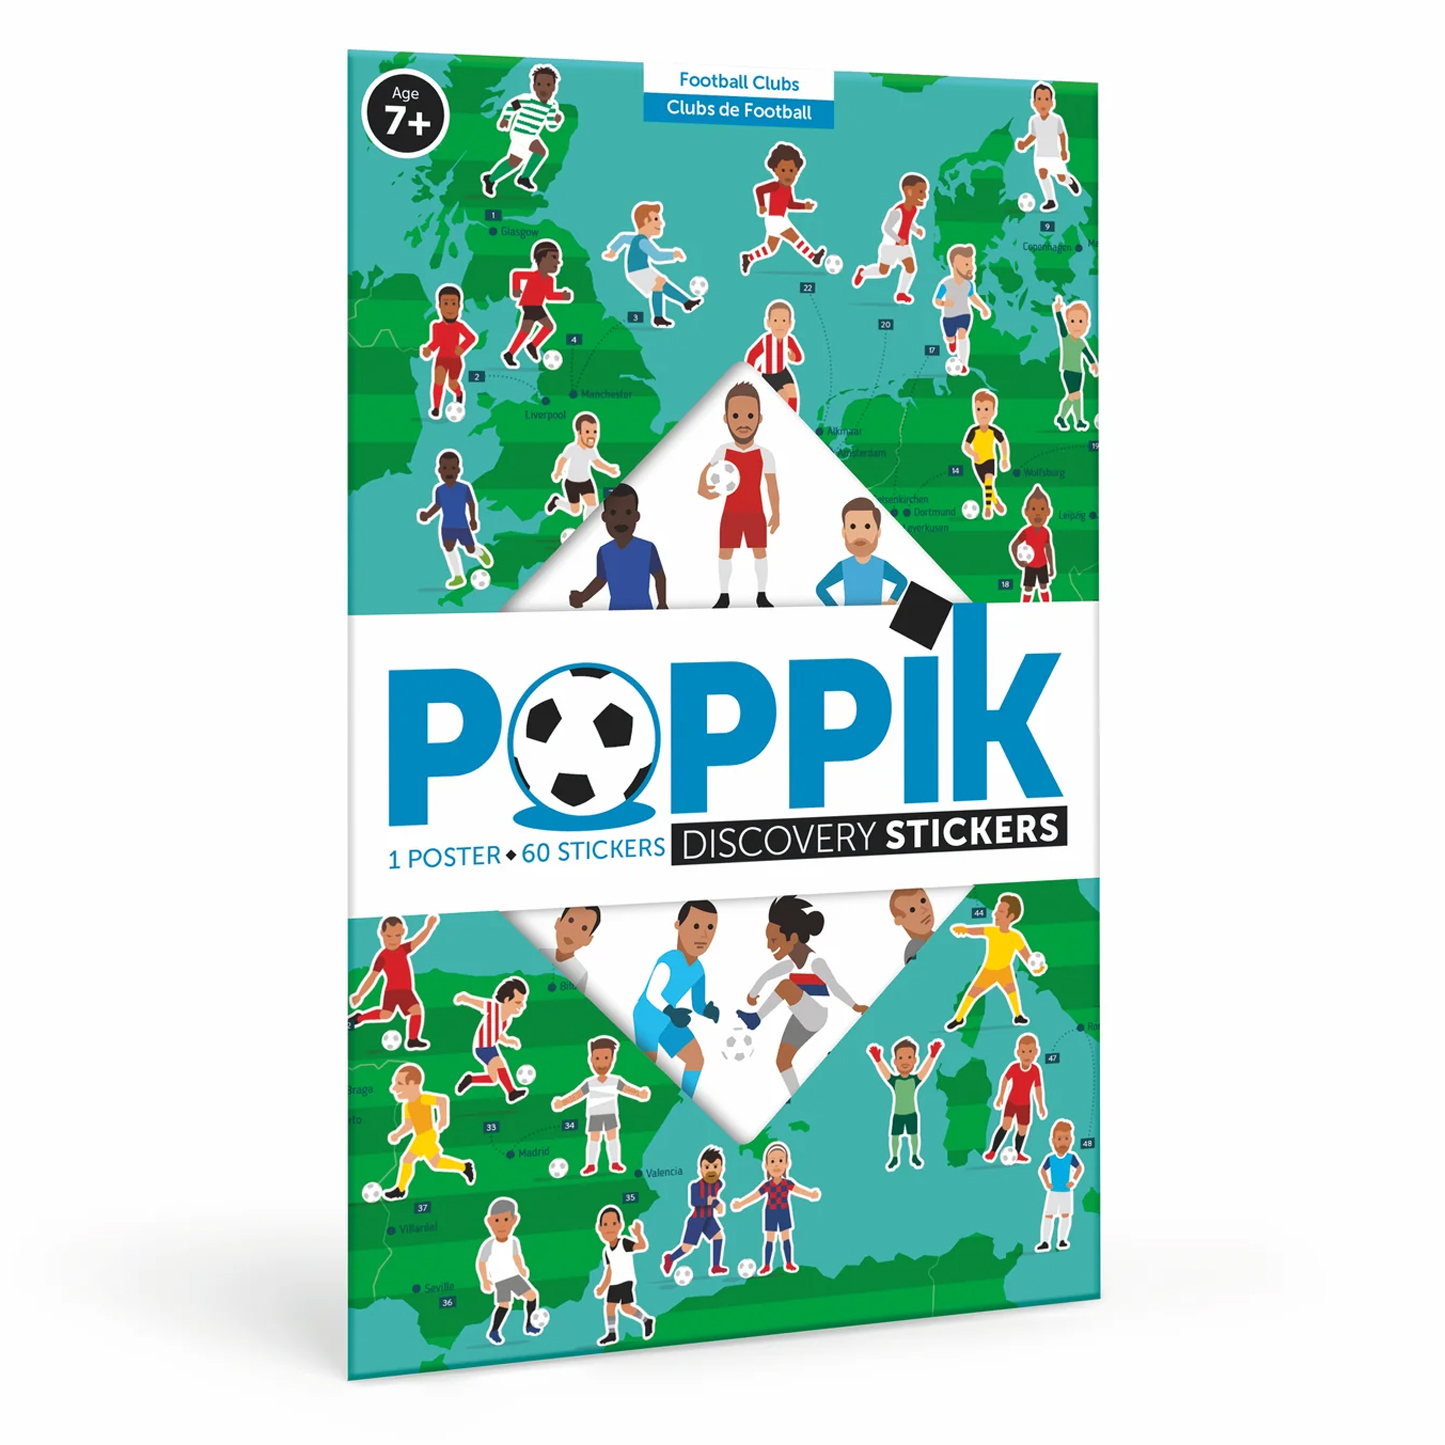  Poppik Discovery Sticker Poster - Football Clubs